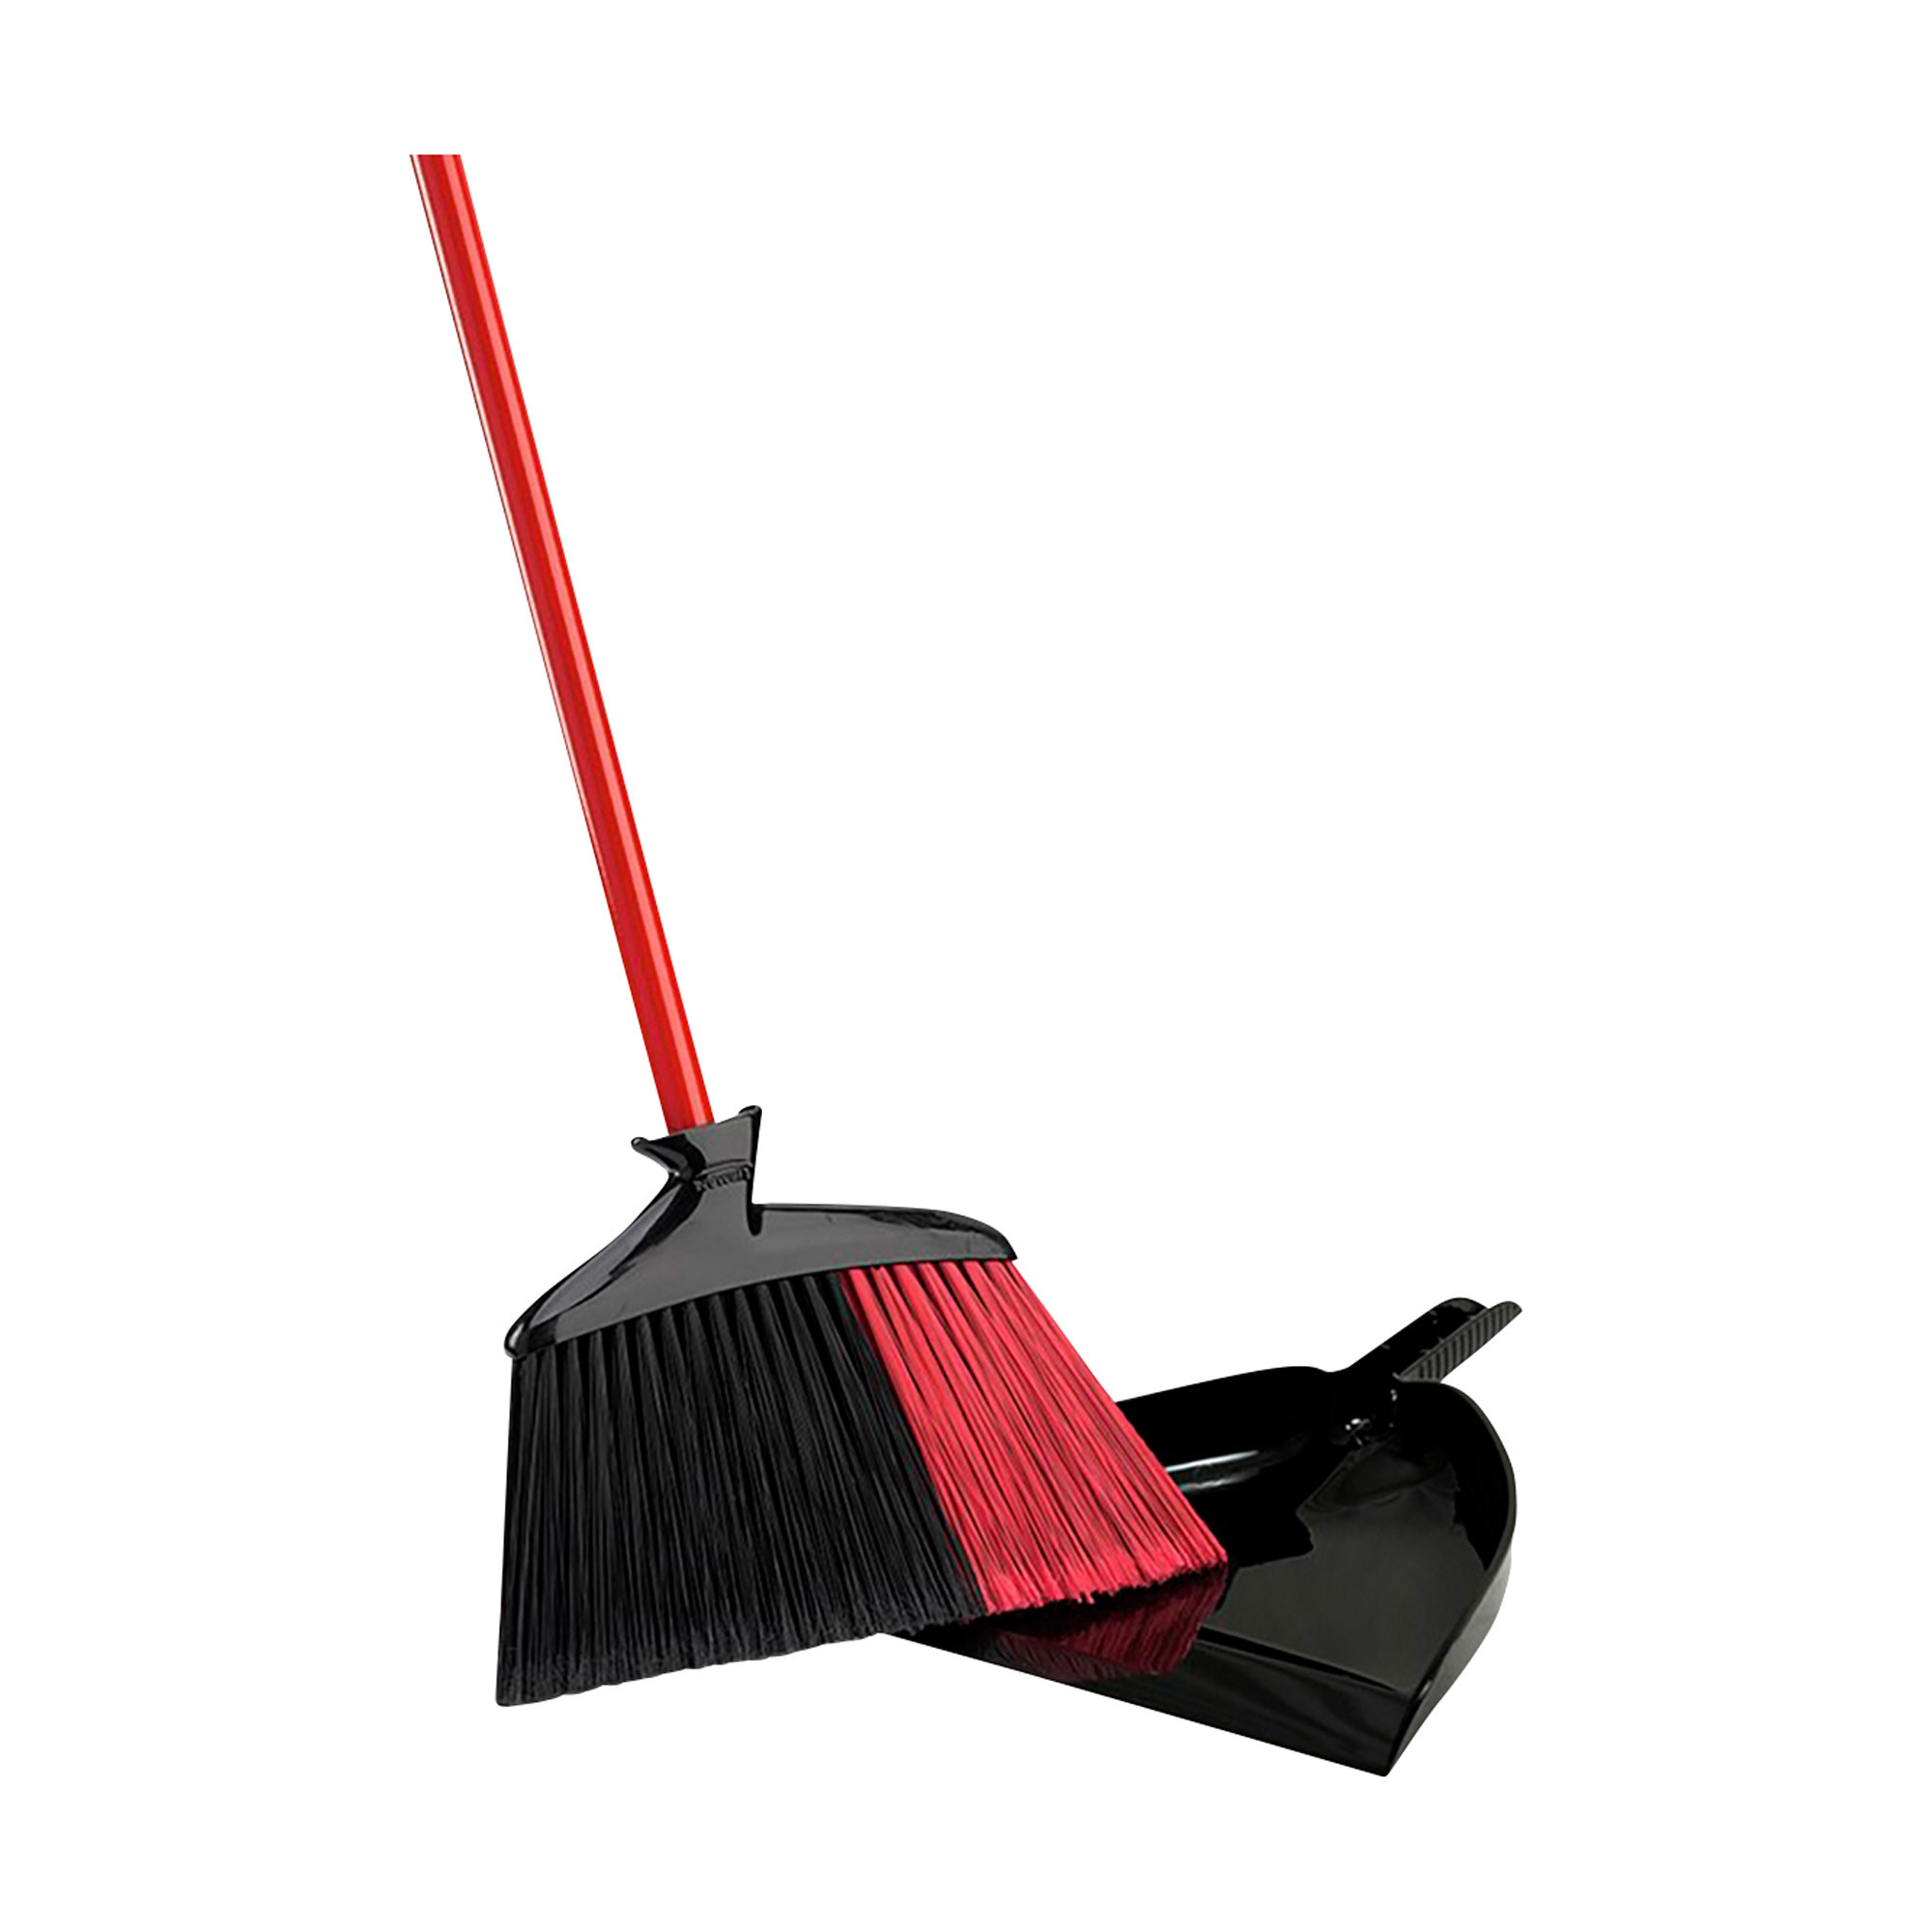 Libman Extra-Wide 13 3/4in Angle Broom with Dust Pan, 54 1/2Inch L Handle, Model 905